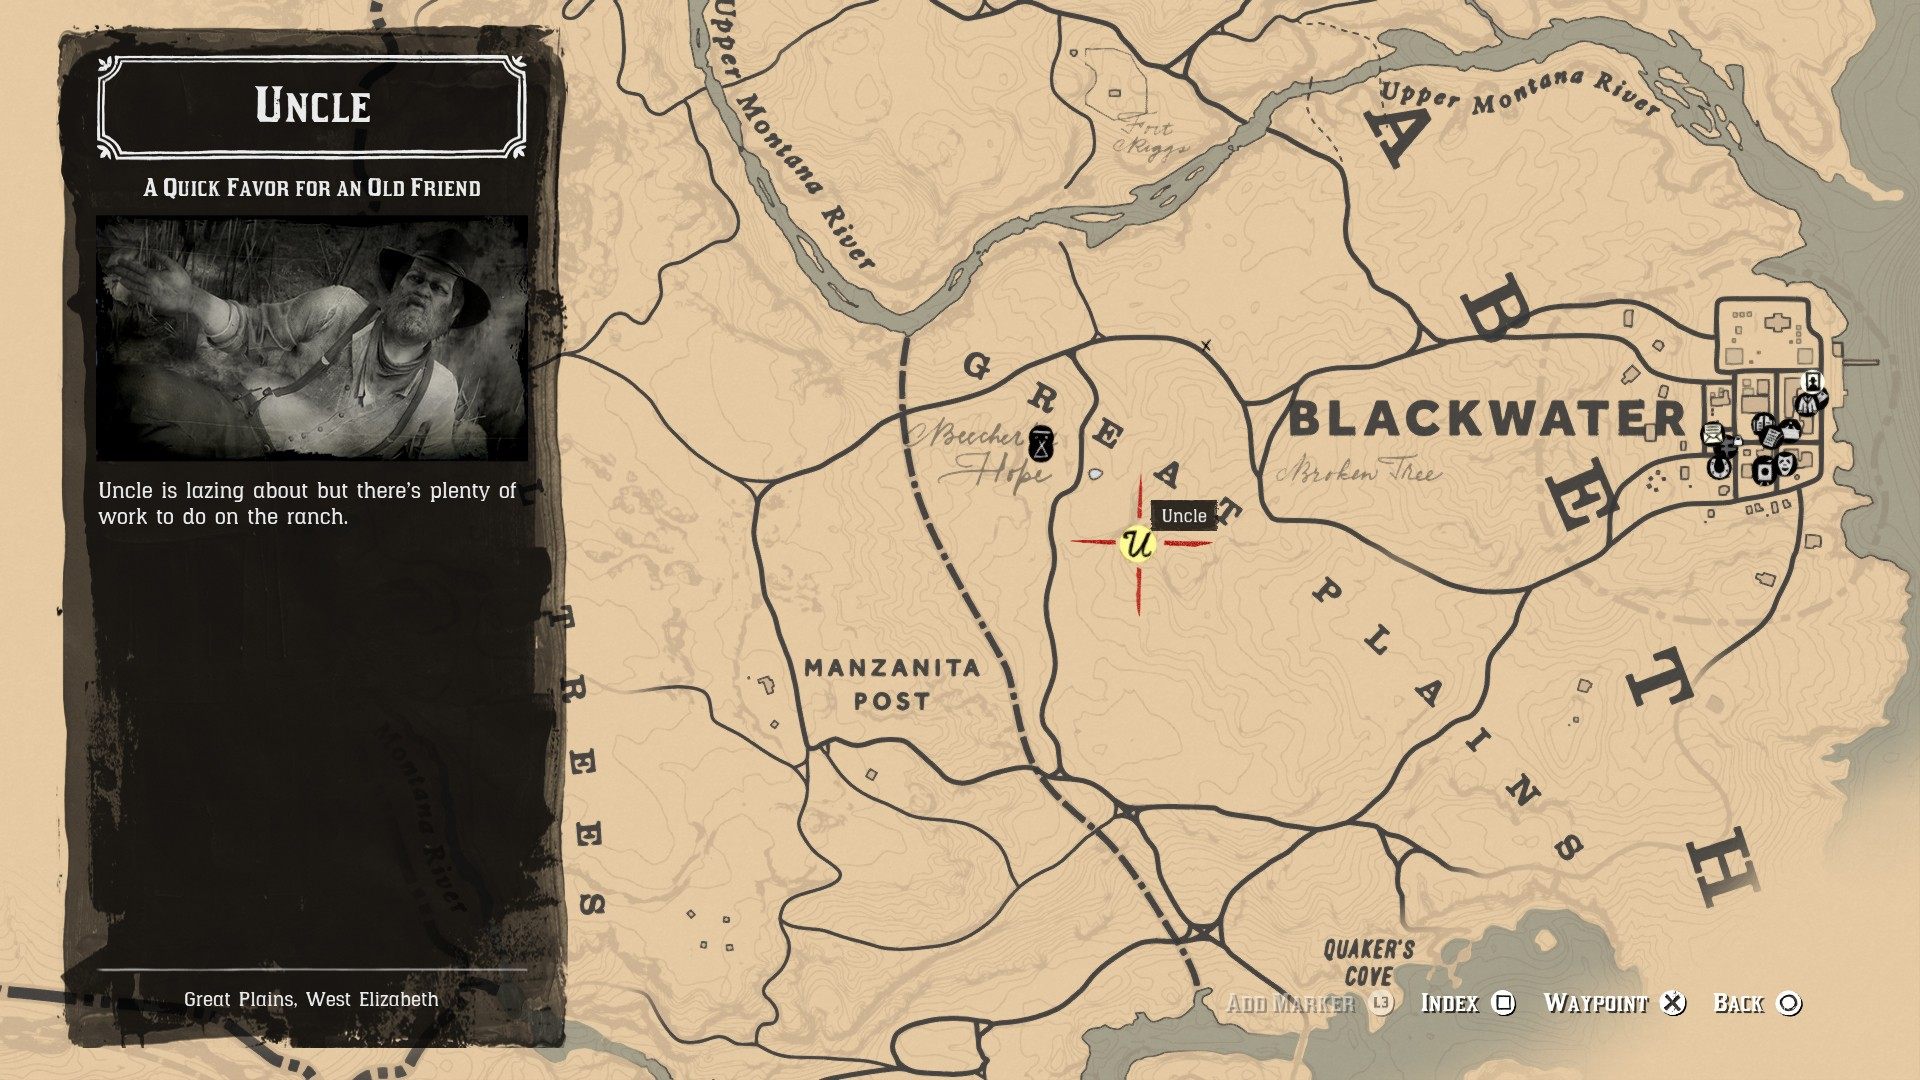 A Quick for an Old Friend, Red Dead Redemption 2 Mission